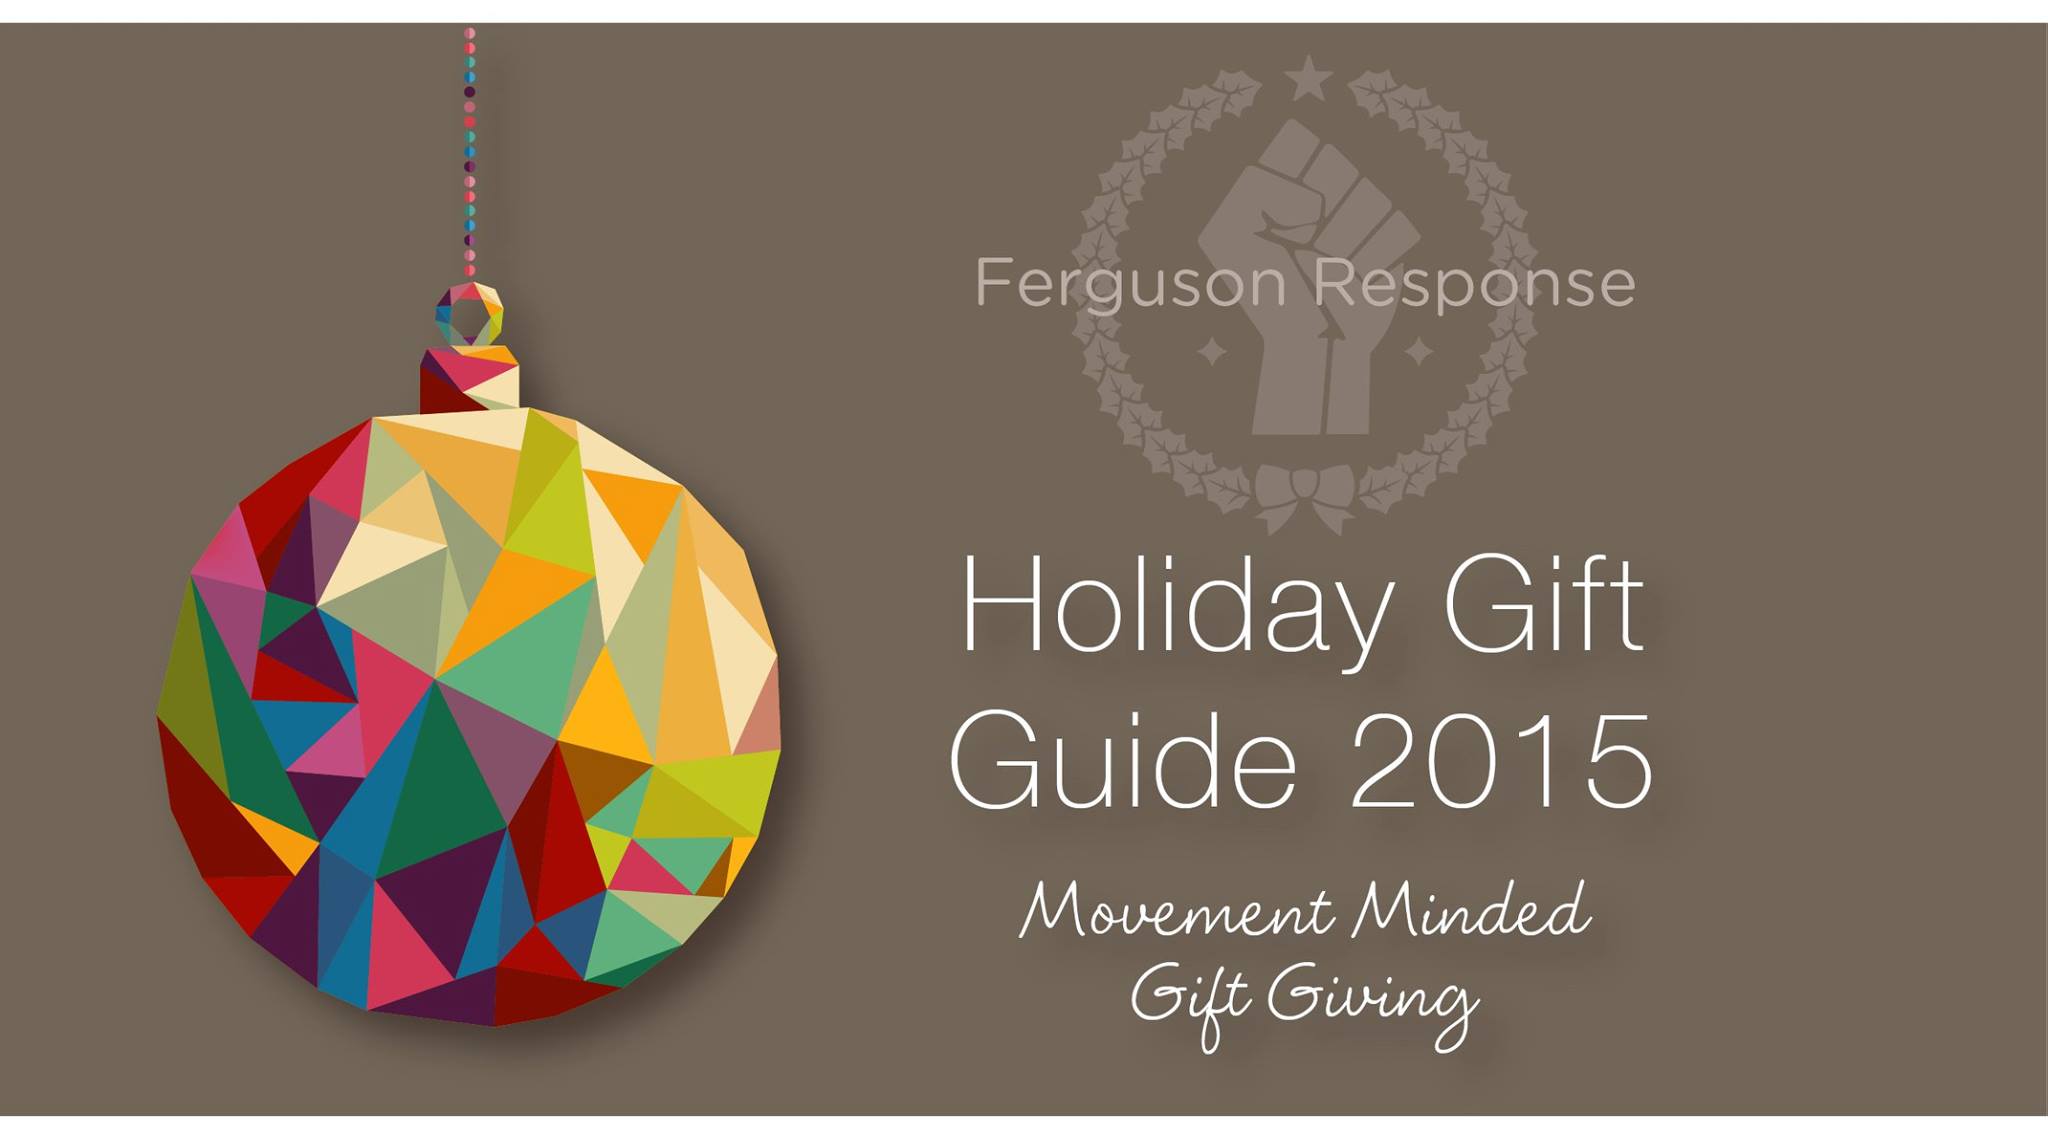 FRN Holiday Gift Guide 2015